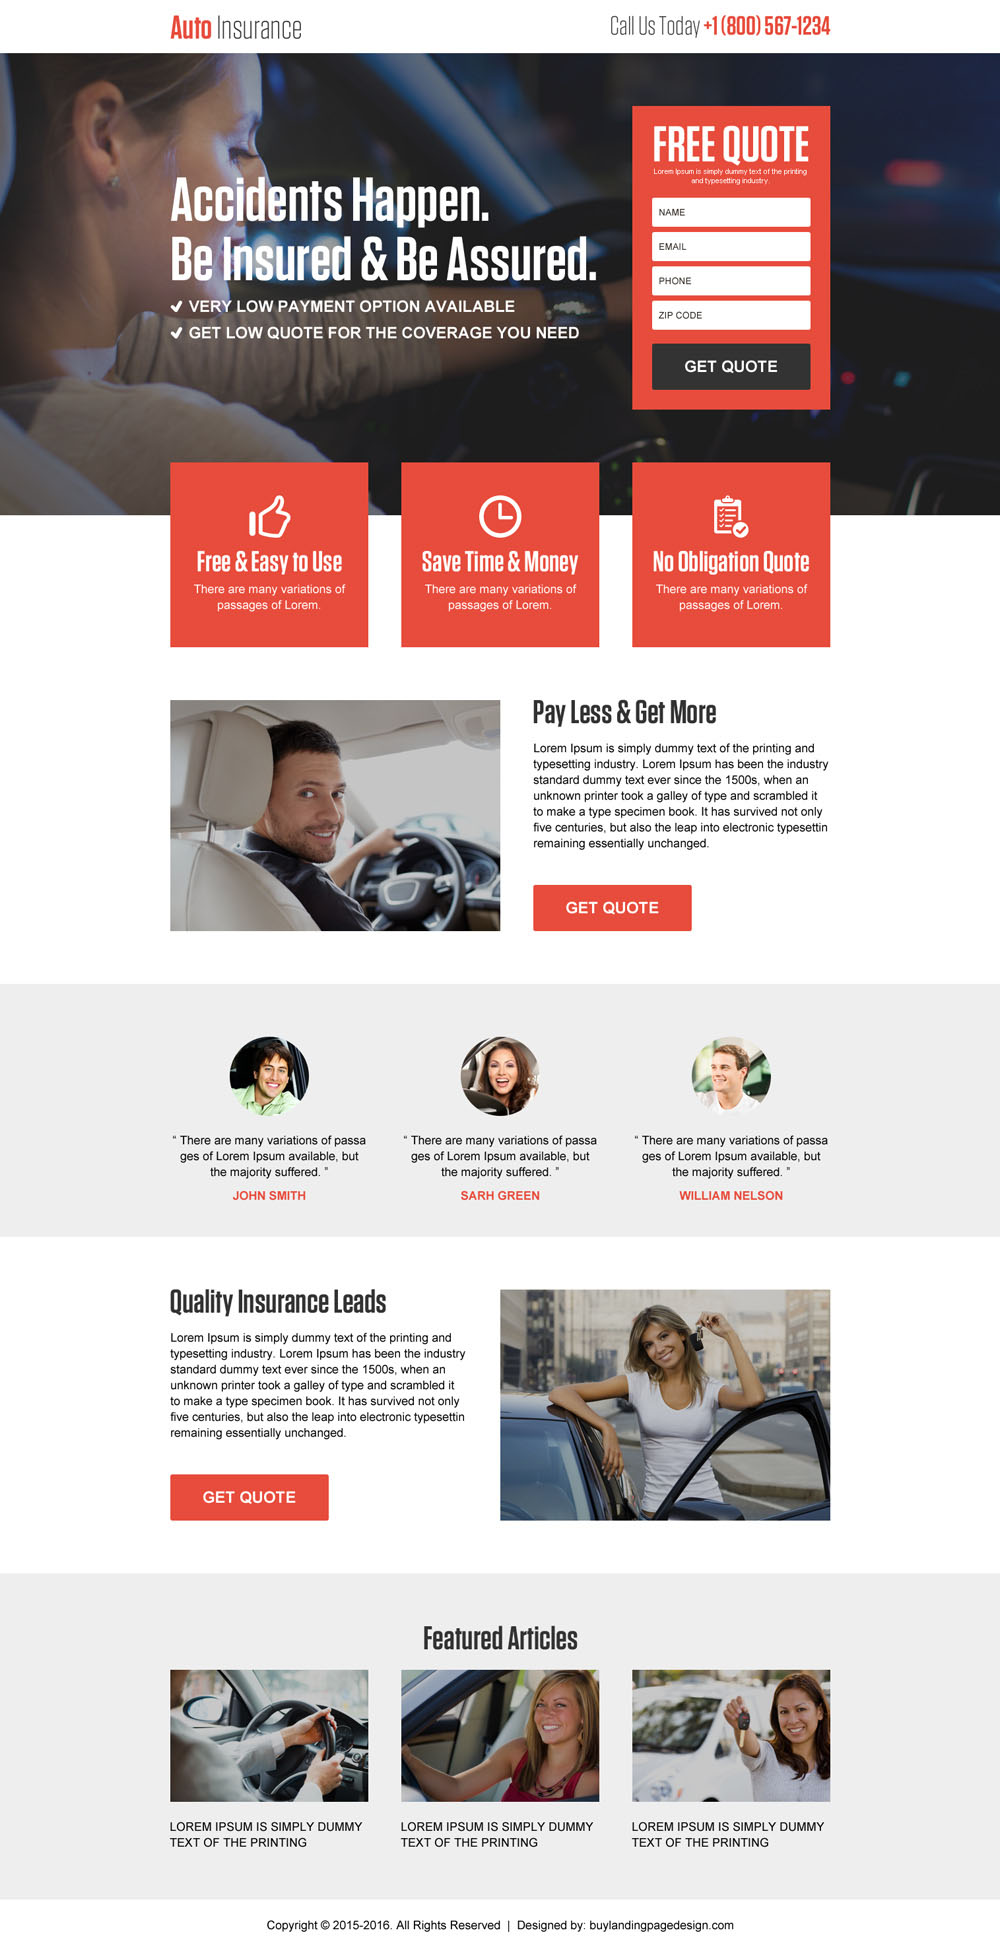 get-free-quote-for-auto-insurance-lead-funnel-converting-landing-page-design-044